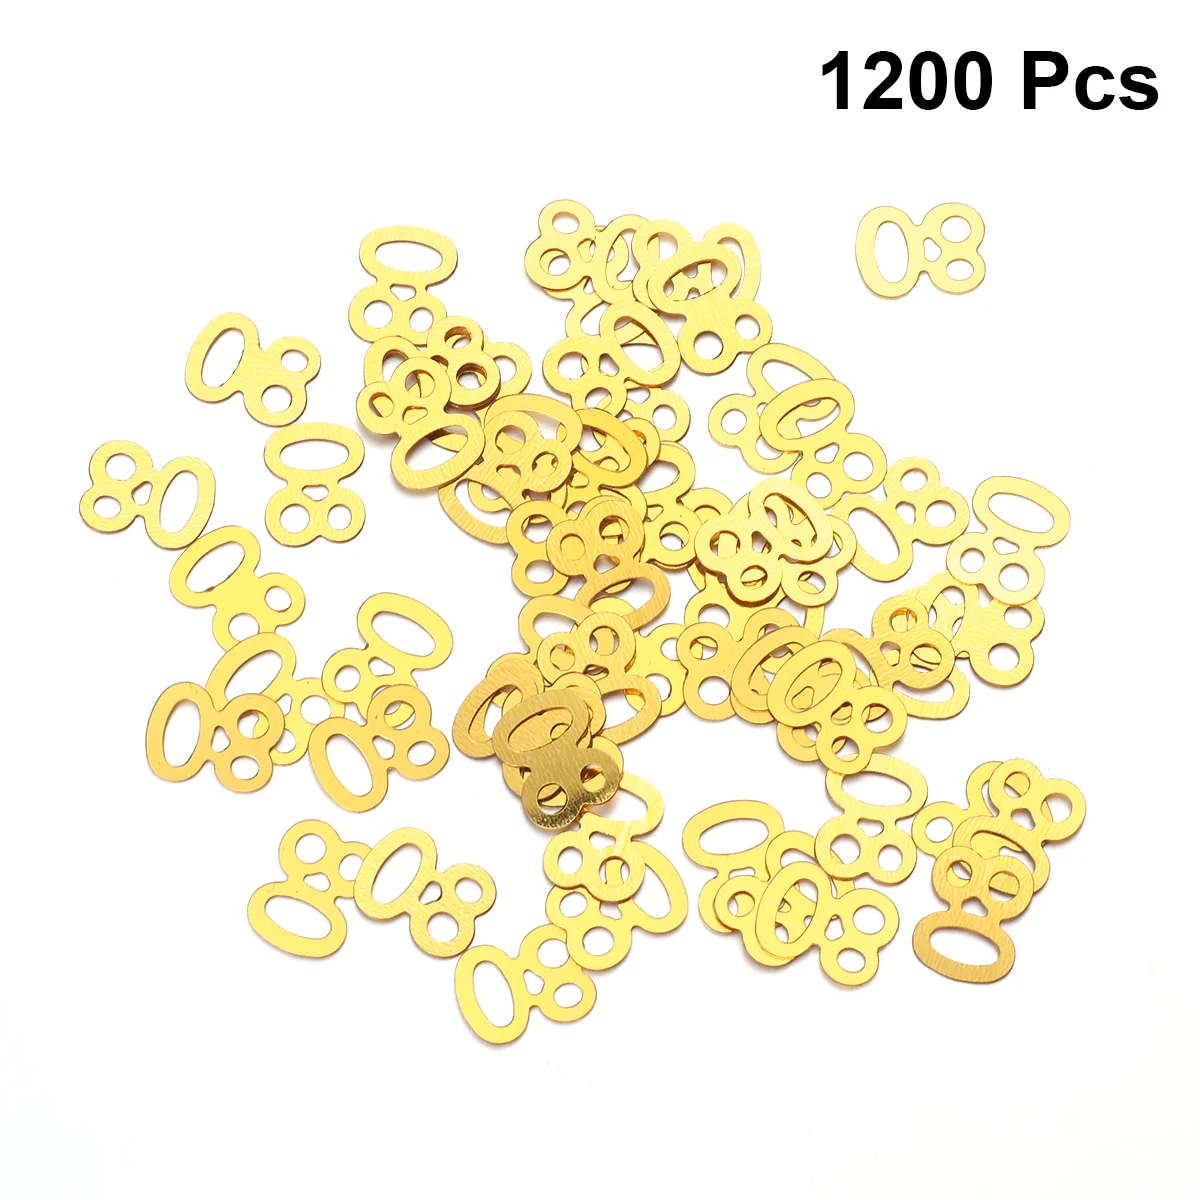 

1200 Pcs Ornament Decoration Confetti Dining Table for Party Birthday Anniversary